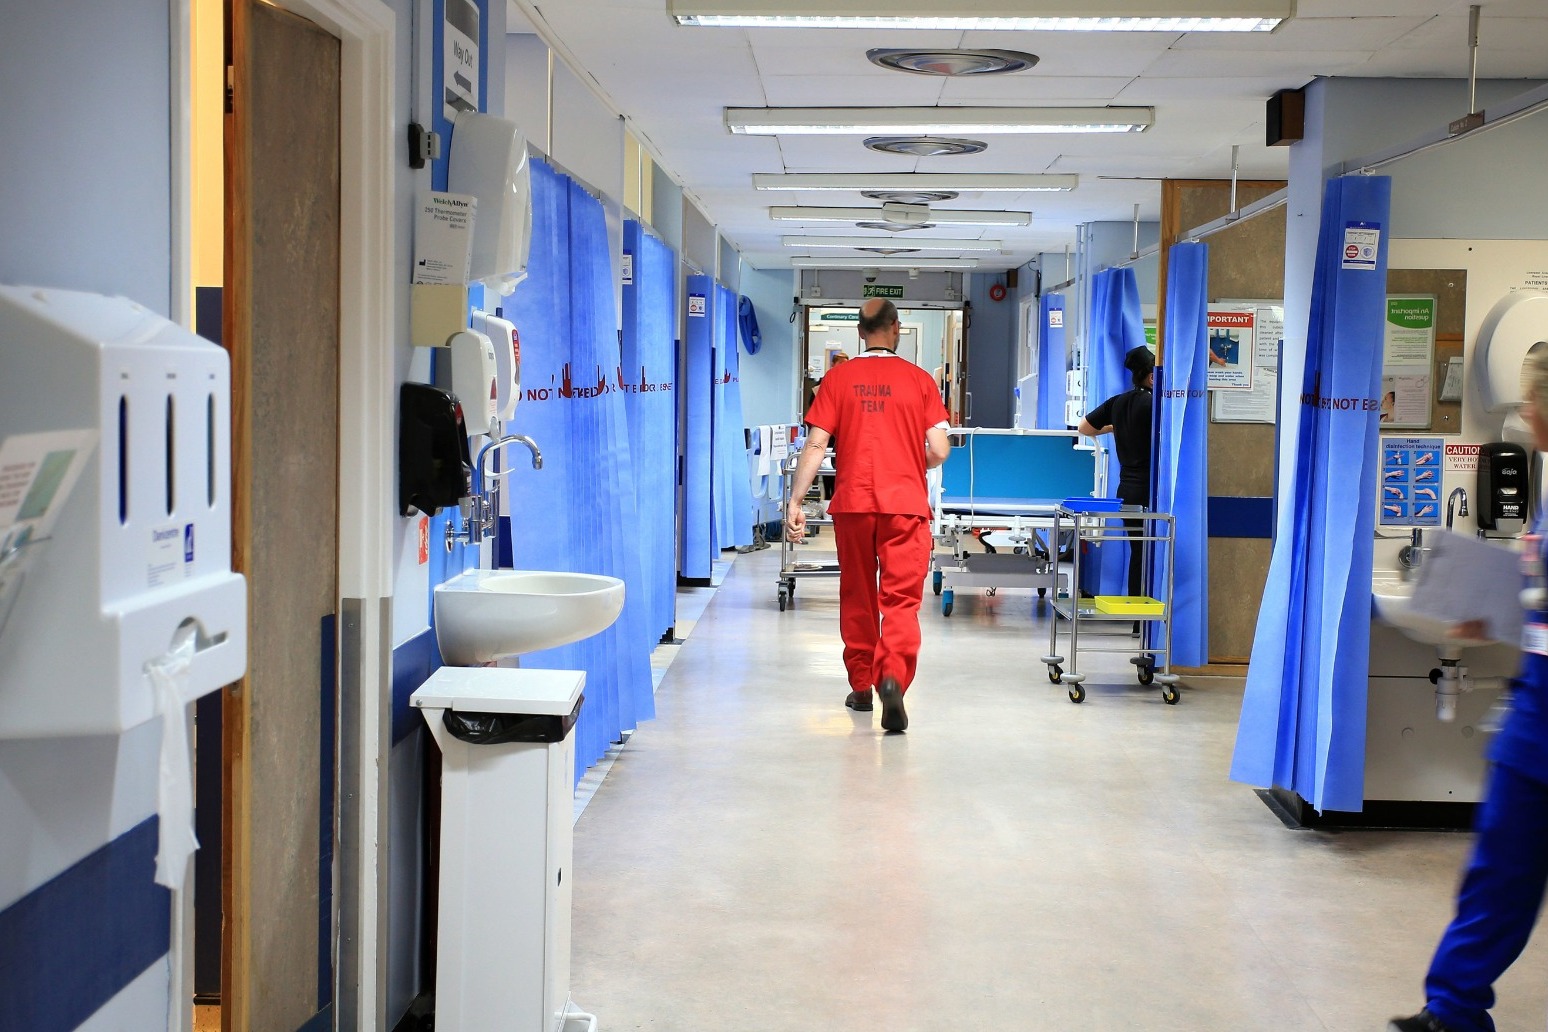 Scottish Labour: Ending unlimited long Covid sick pay for NHS staff is reckless 